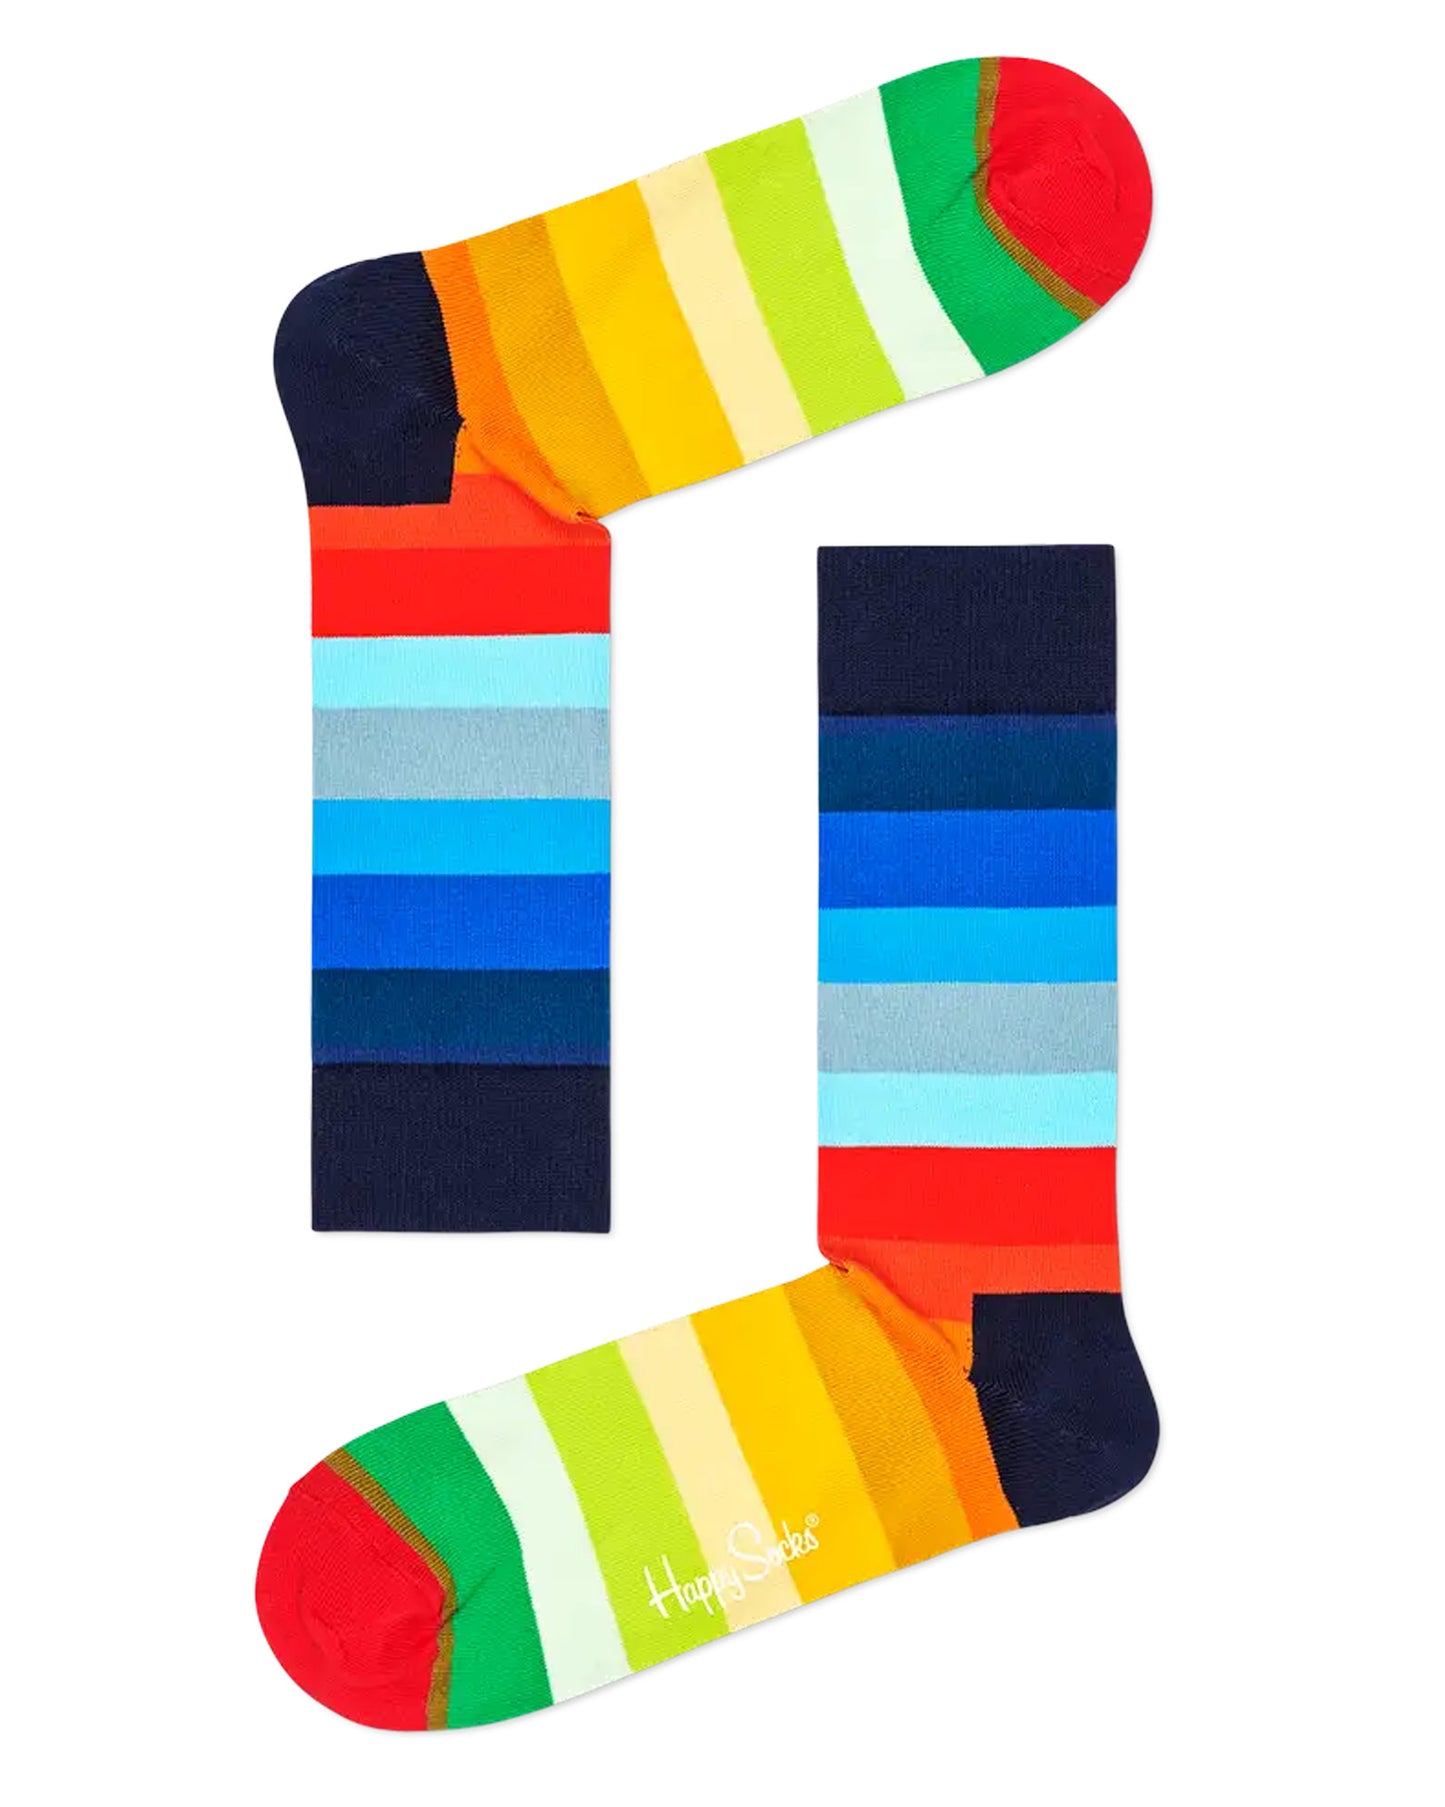 Happy Socks XBD02-7300 Classic Holiday Sock Gift Set - Multicoloured vertical stripes. Available in men and women size.